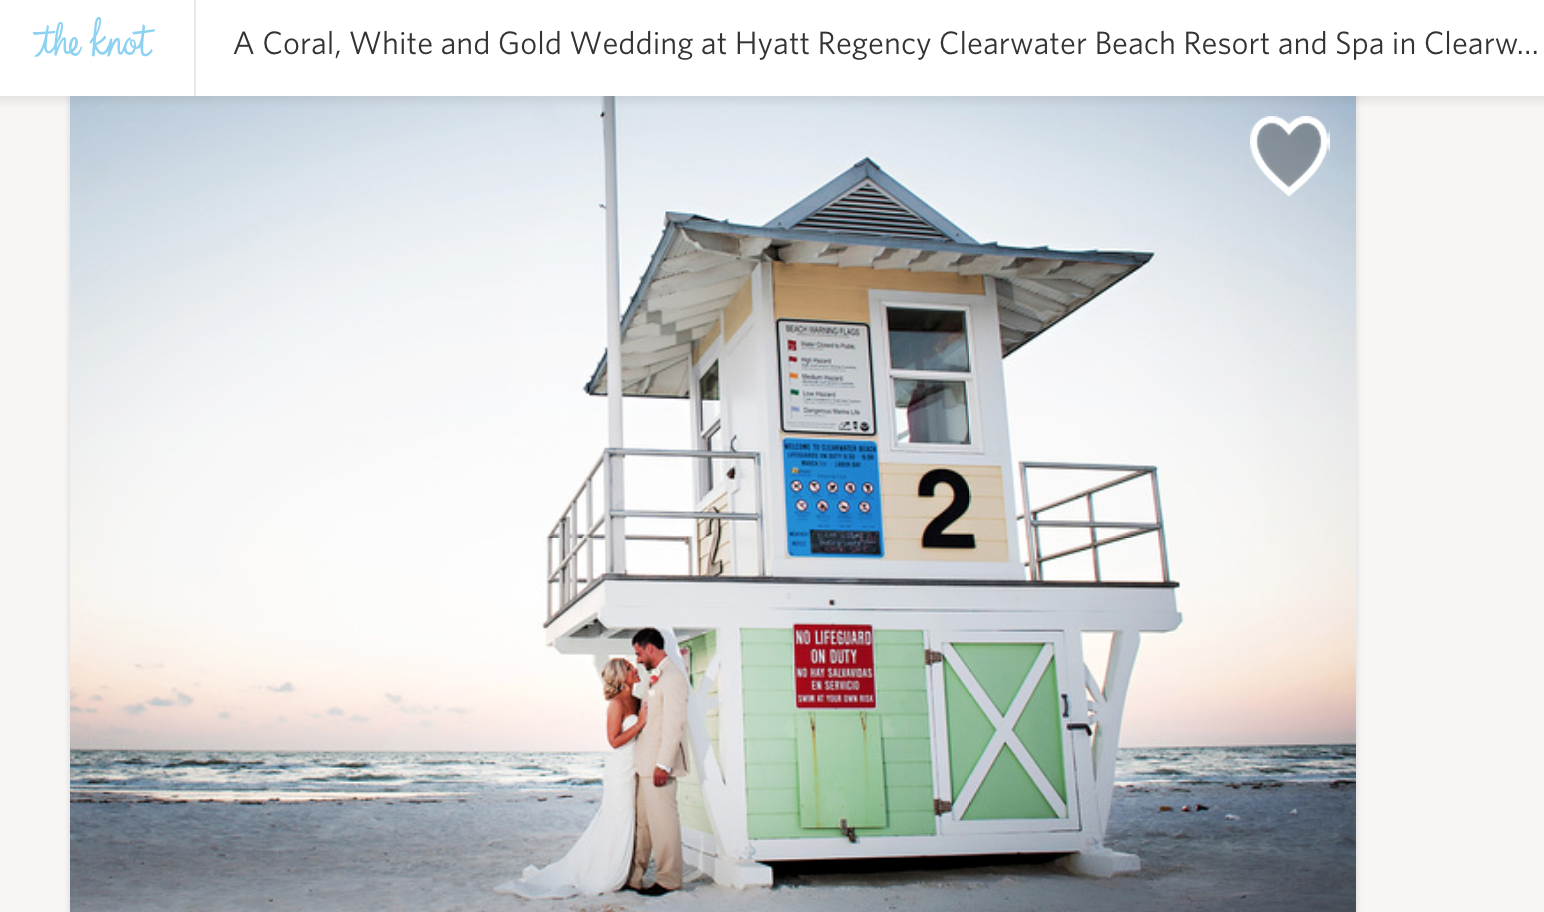 A Coral, White and Gold Wedding at Hyatt Regency Clearwater Beach Resort and Spa